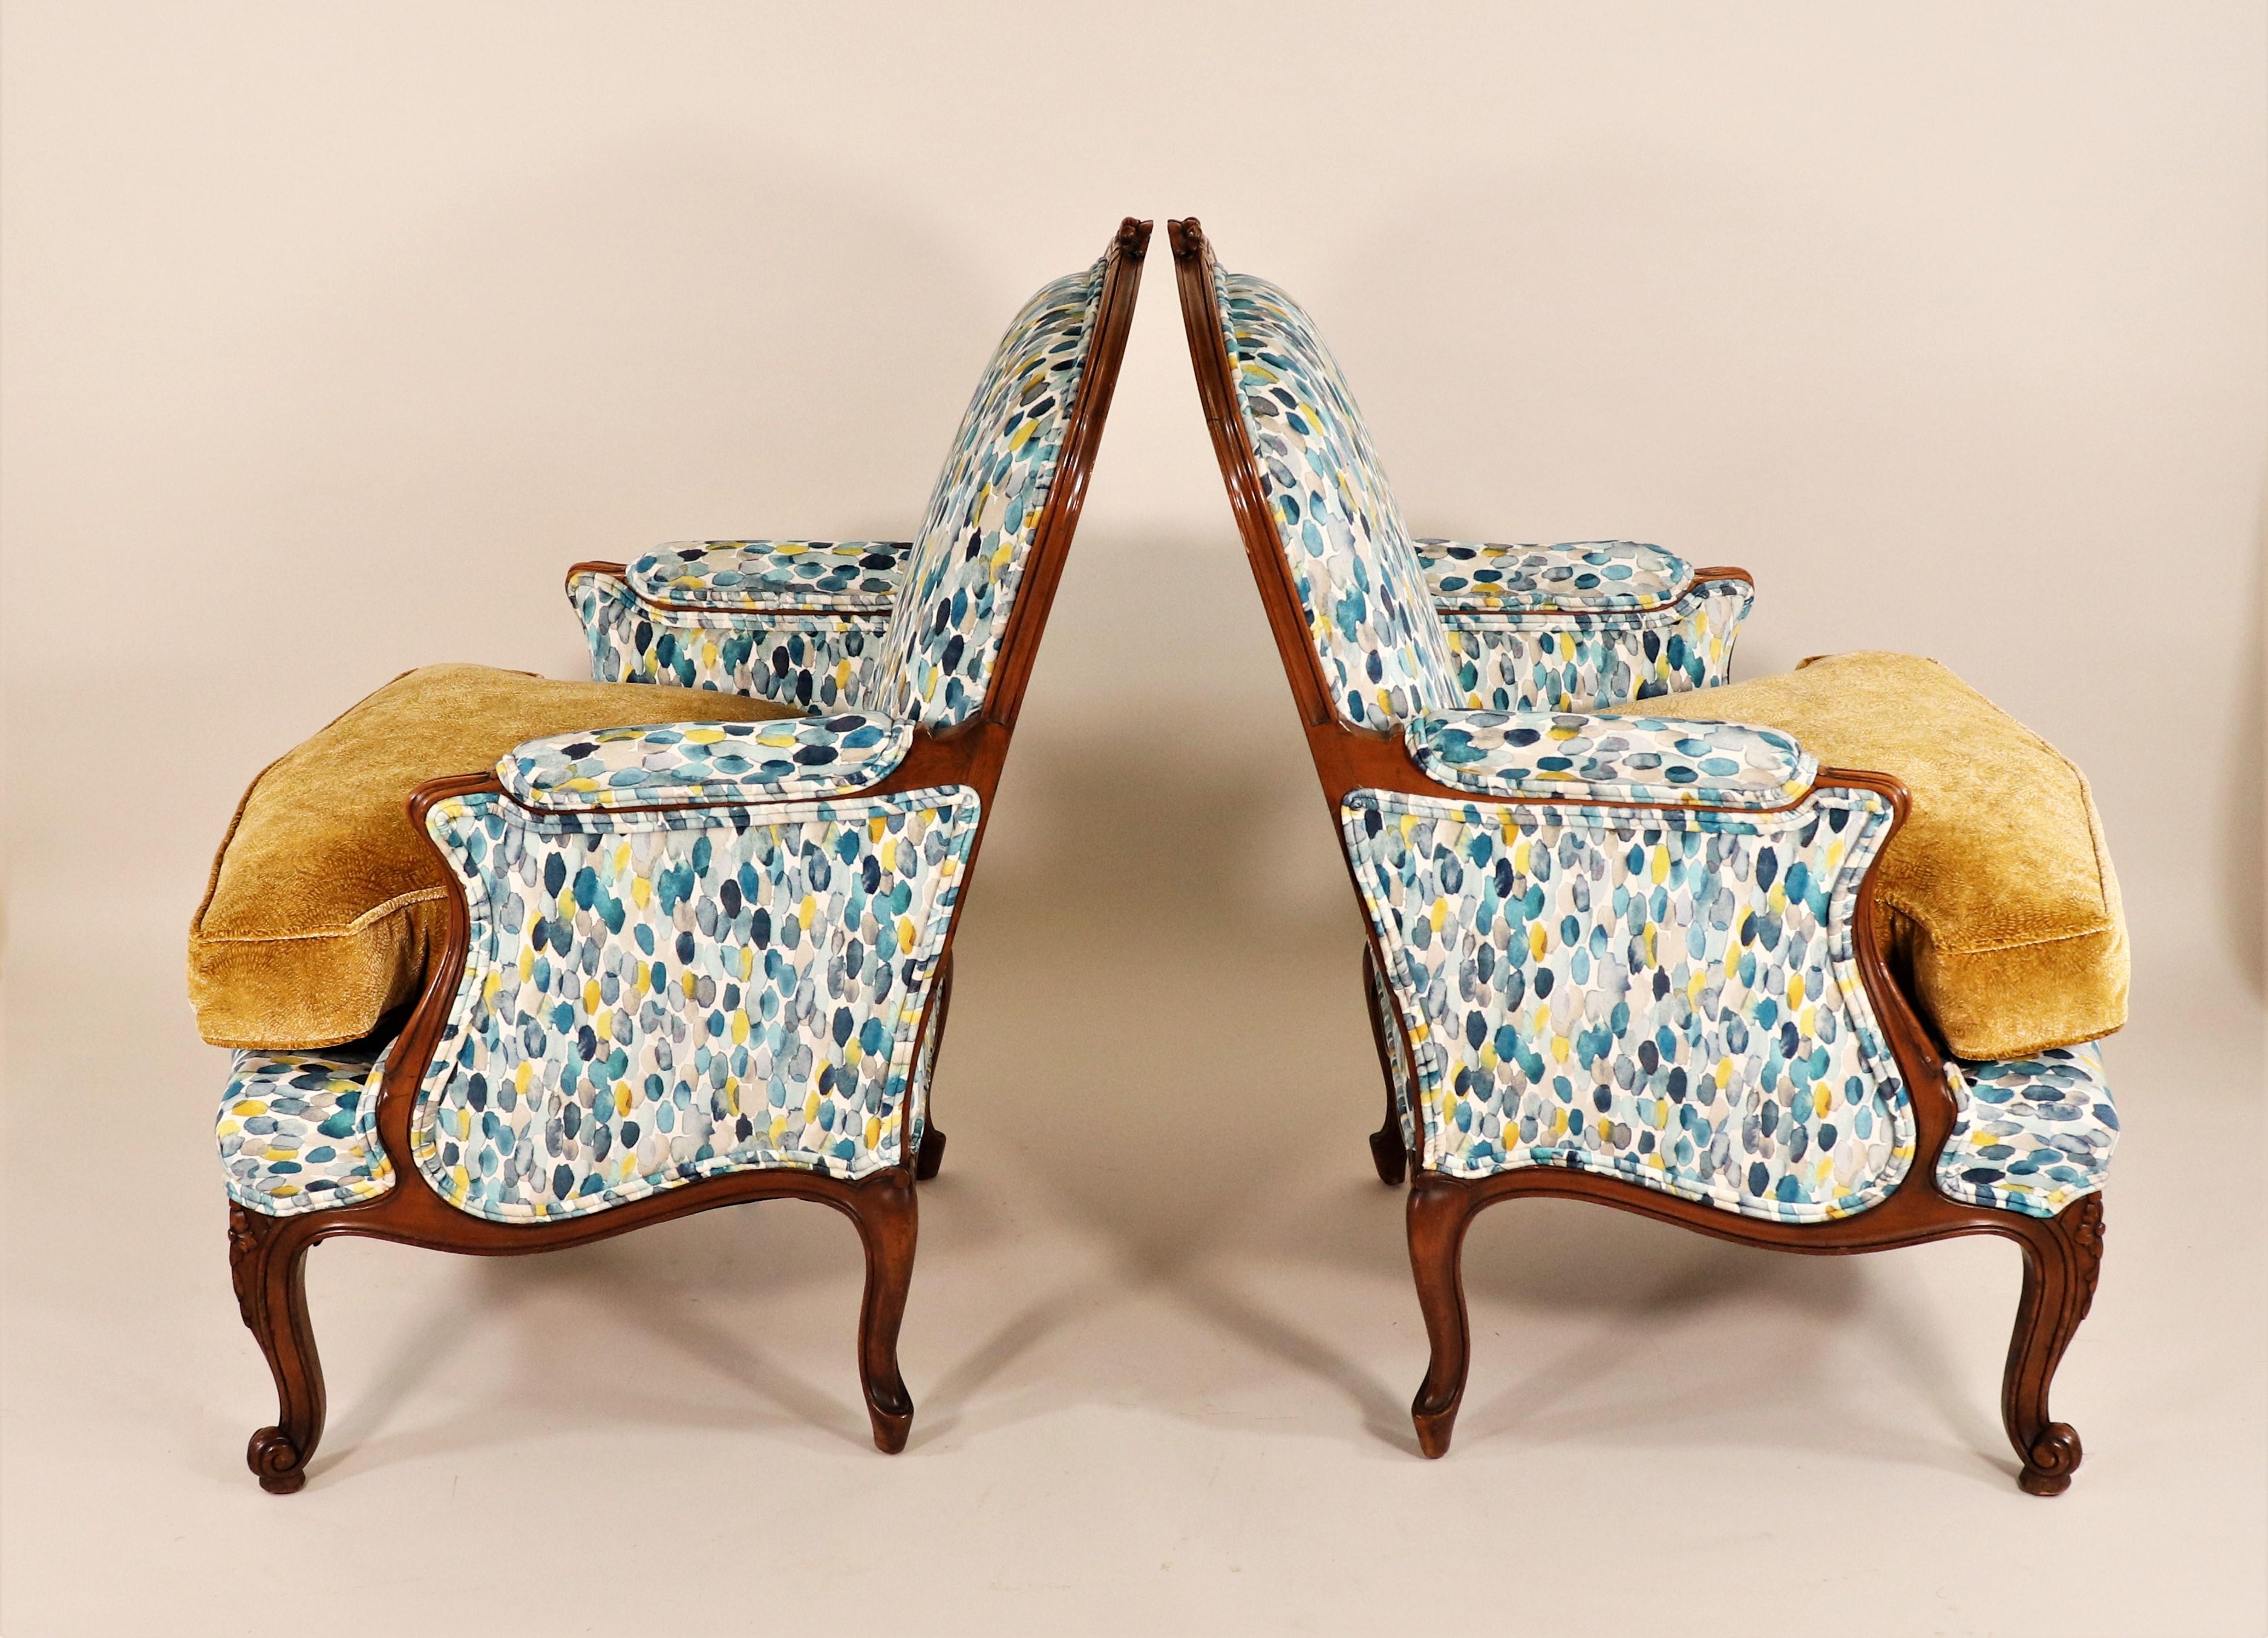 Pair of Mid-19th Century Louis XV Style Bergère Armchairs with Modern Fabrics For Sale 1